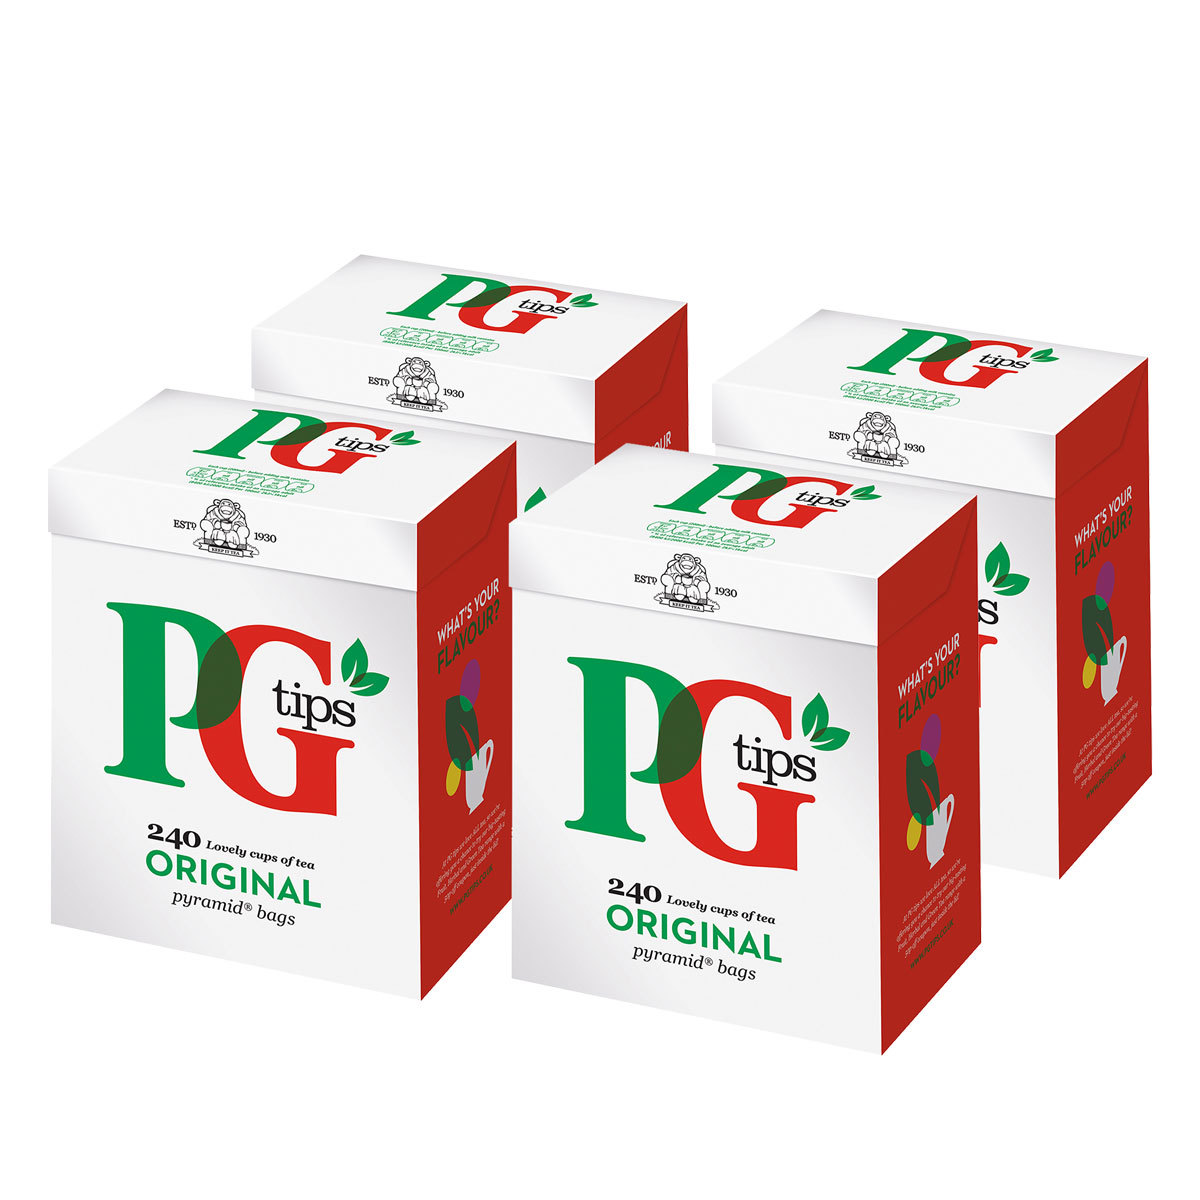 PG Tips Black Tea, Pyramid Tea Bags, 80-Count Boxes (Pack of 4) 